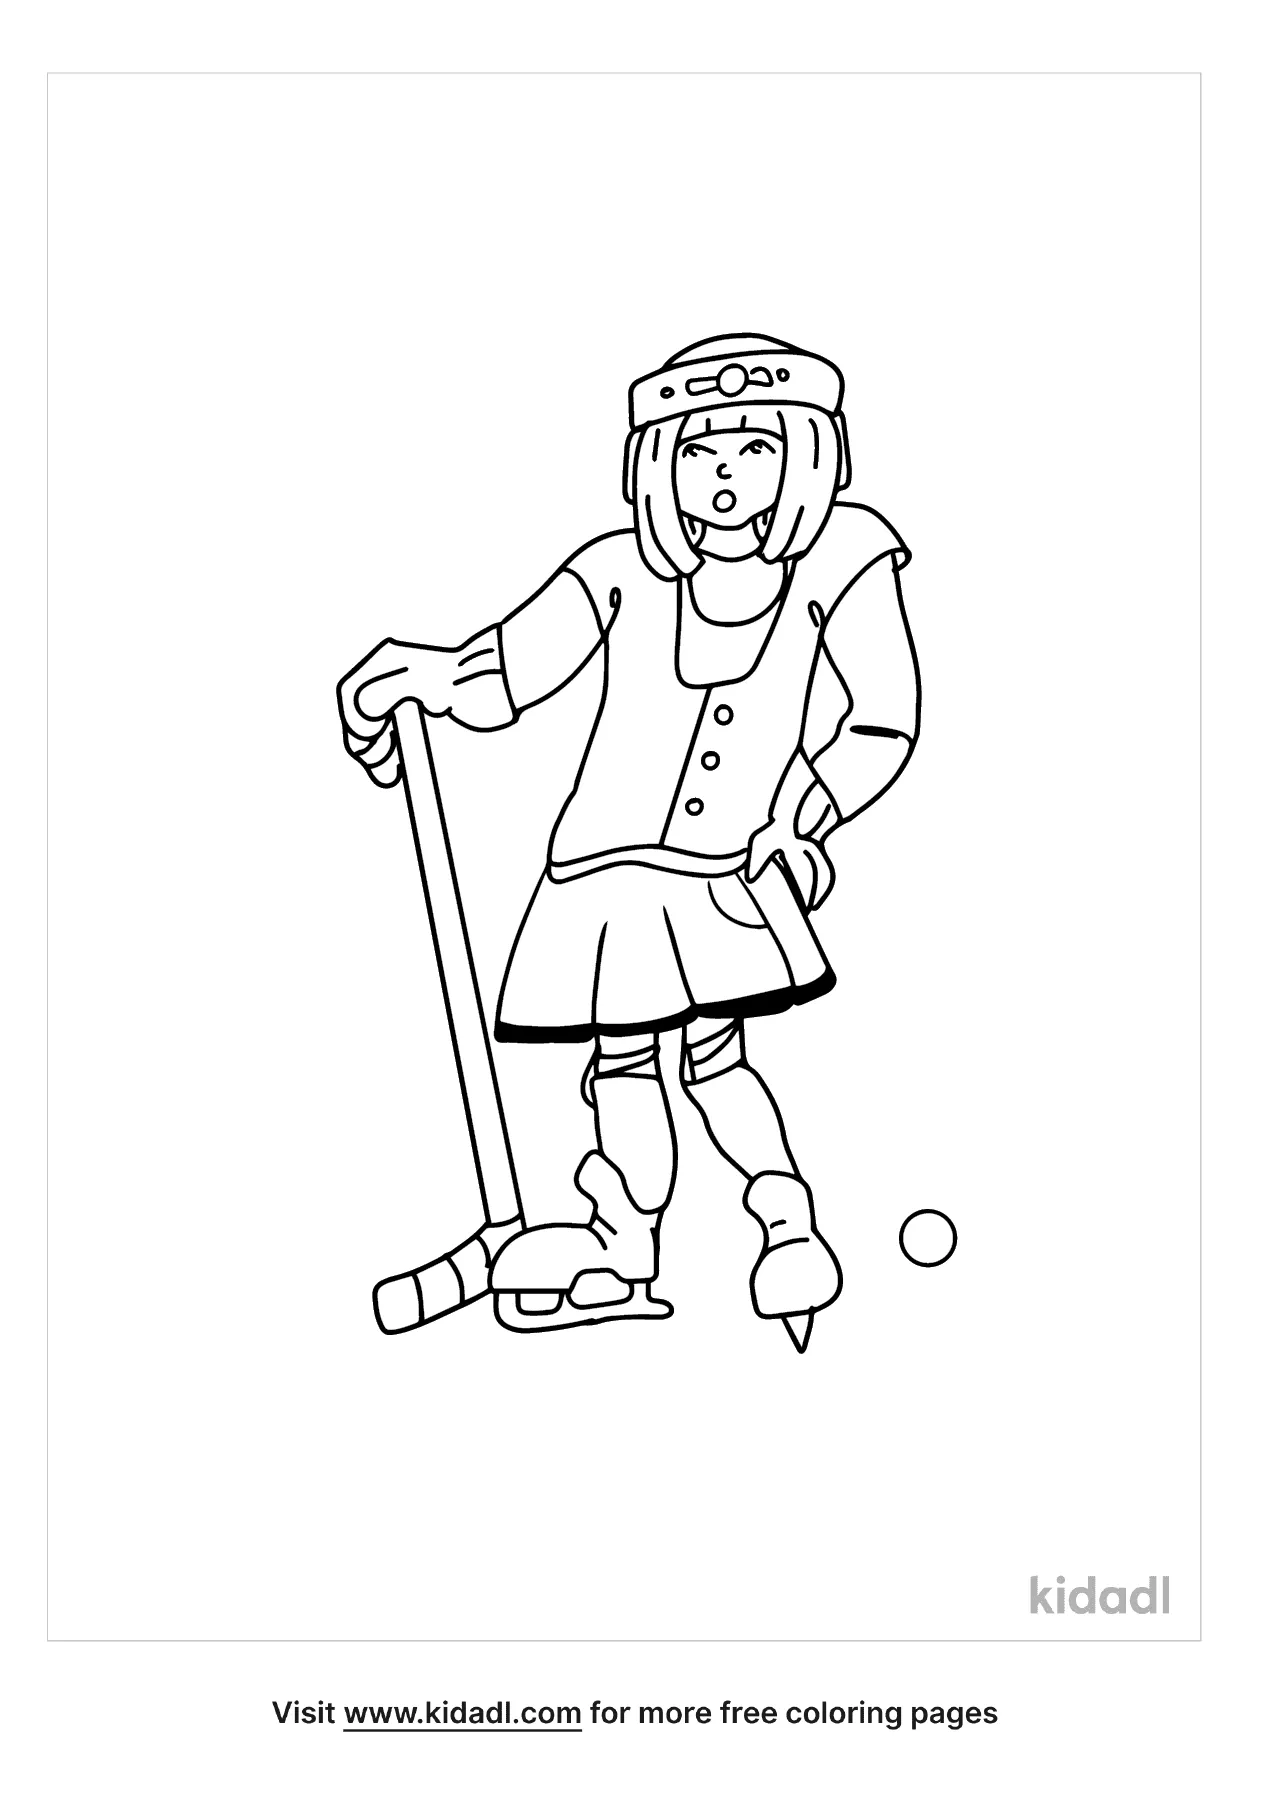 Hockey Player Coloring Pages Free Sports Coloring Pages Kidadl